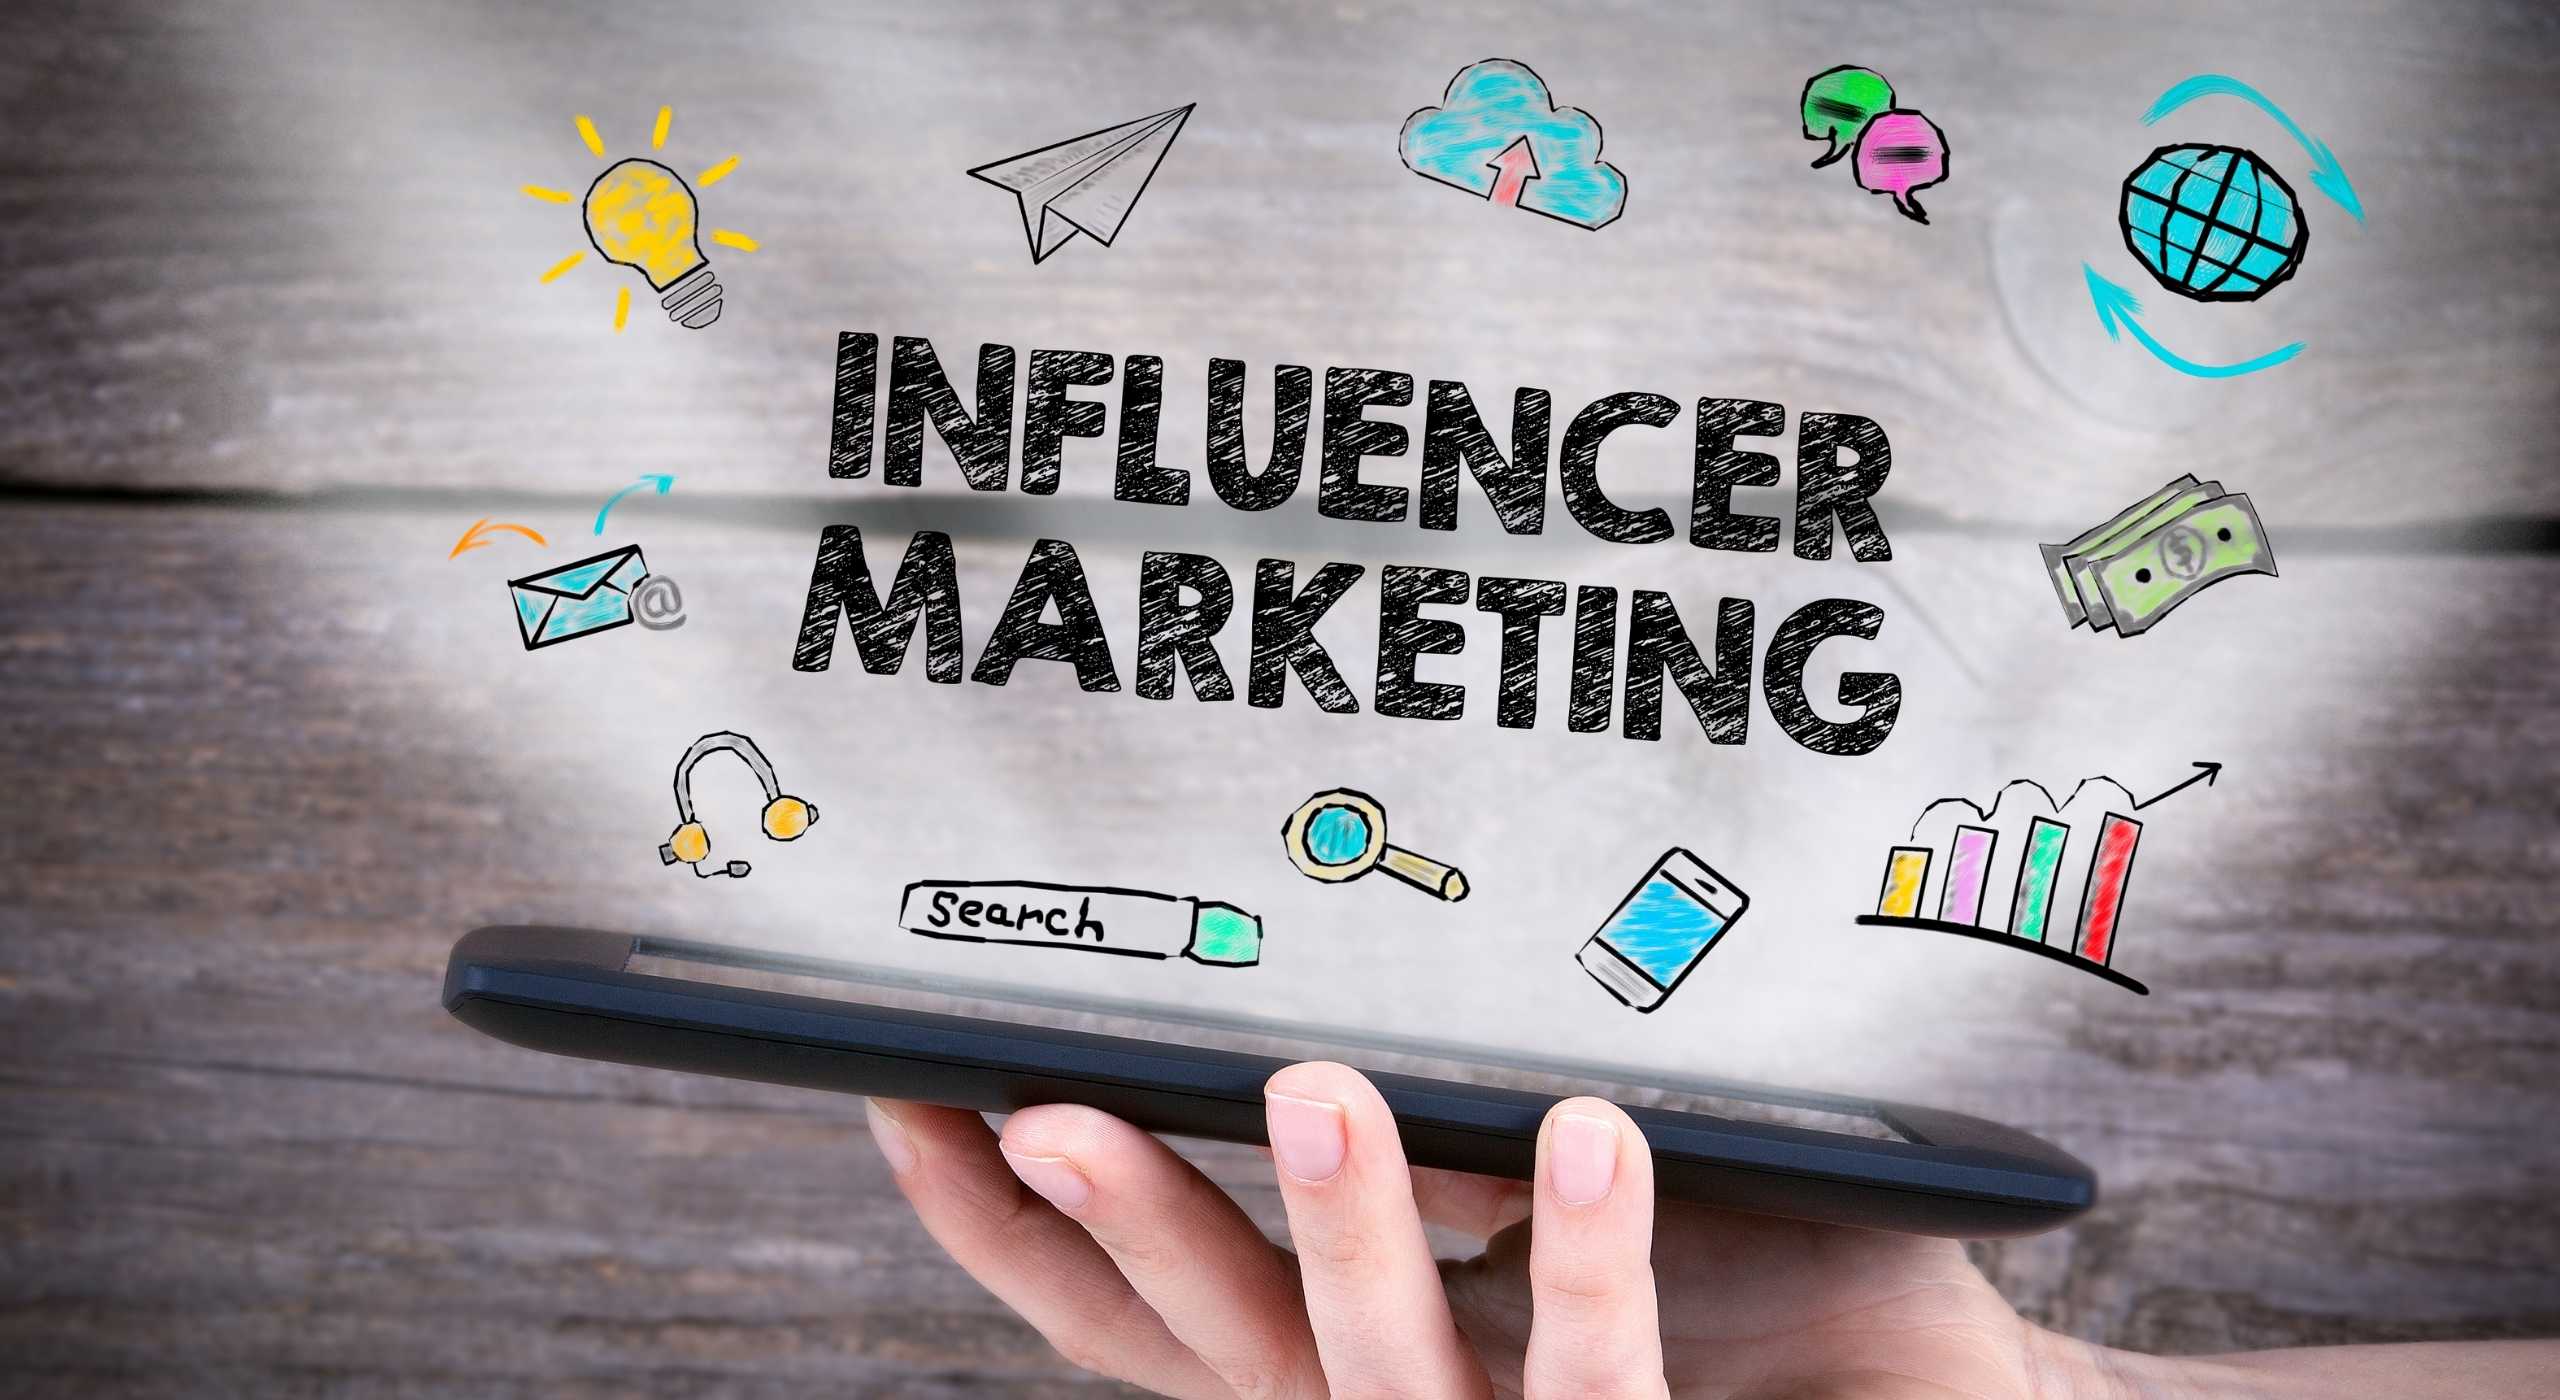 Image shows a hand holding a tablet with the words "Influencer Marketing" written on the screen.